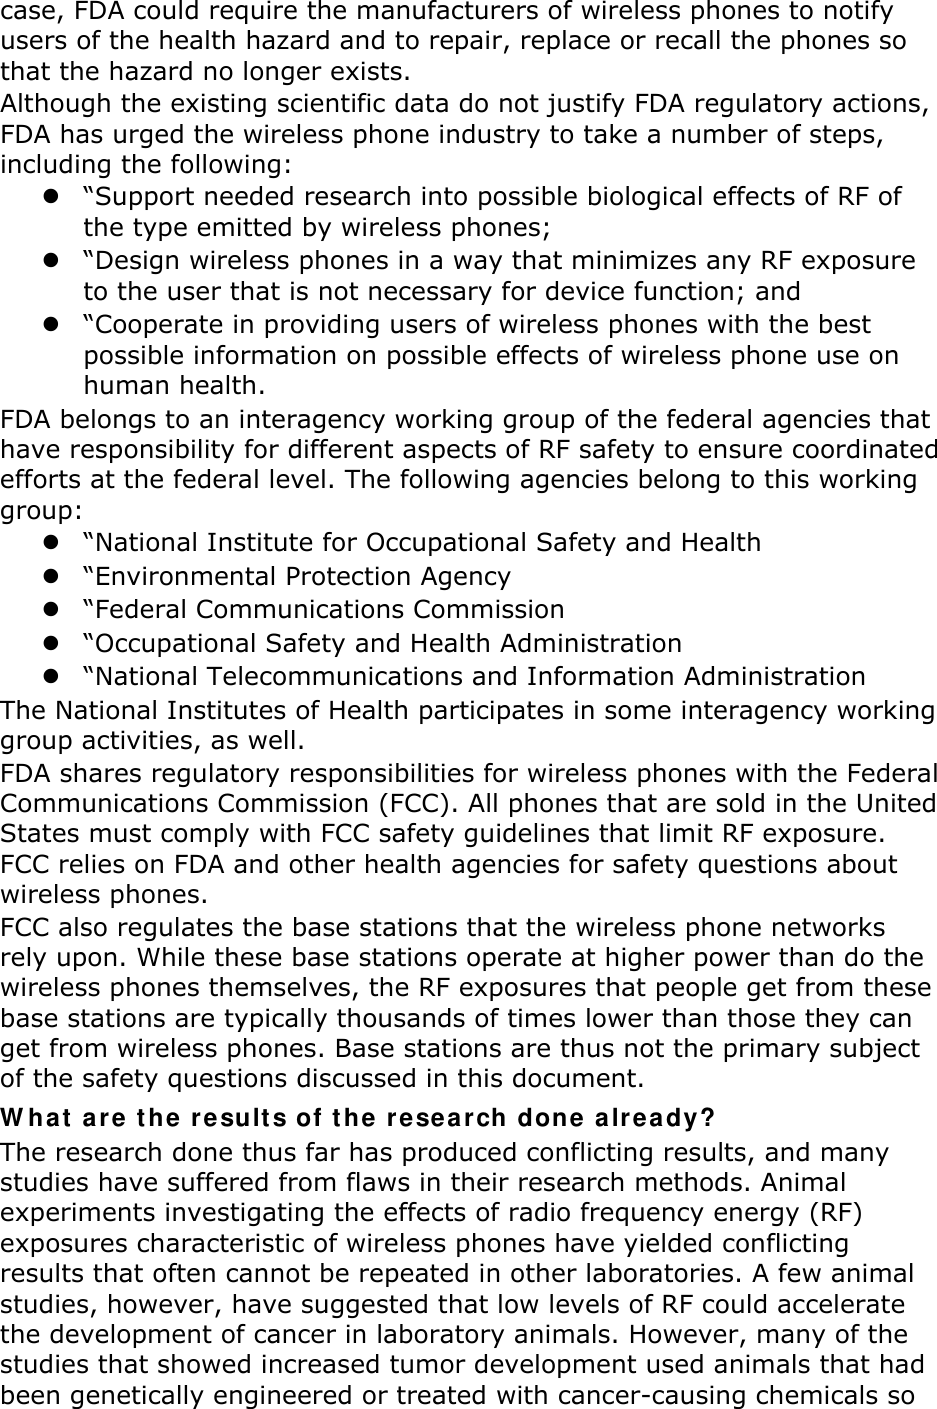 case, FDA could require the manufacturers of wireless phones to notify users of the health hazard and to repair, replace or recall the phones so that the hazard no longer exists. Although the existing scientific data do not justify FDA regulatory actions, FDA has urged the wireless phone industry to take a number of steps, including the following: z “Support needed research into possible biological effects of RF of the type emitted by wireless phones; z “Design wireless phones in a way that minimizes any RF exposure to the user that is not necessary for device function; and z “Cooperate in providing users of wireless phones with the best possible information on possible effects of wireless phone use on human health. FDA belongs to an interagency working group of the federal agencies that have responsibility for different aspects of RF safety to ensure coordinated efforts at the federal level. The following agencies belong to this working group: z “National Institute for Occupational Safety and Health z “Environmental Protection Agency z “Federal Communications Commission z “Occupational Safety and Health Administration z “National Telecommunications and Information Administration The National Institutes of Health participates in some interagency working group activities, as well. FDA shares regulatory responsibilities for wireless phones with the Federal Communications Commission (FCC). All phones that are sold in the United States must comply with FCC safety guidelines that limit RF exposure. FCC relies on FDA and other health agencies for safety questions about wireless phones. FCC also regulates the base stations that the wireless phone networks rely upon. While these base stations operate at higher power than do the wireless phones themselves, the RF exposures that people get from these base stations are typically thousands of times lower than those they can get from wireless phones. Base stations are thus not the primary subject of the safety questions discussed in this document. What are the results of the research done already? The research done thus far has produced conflicting results, and many studies have suffered from flaws in their research methods. Animal experiments investigating the effects of radio frequency energy (RF) exposures characteristic of wireless phones have yielded conflicting results that often cannot be repeated in other laboratories. A few animal studies, however, have suggested that low levels of RF could accelerate the development of cancer in laboratory animals. However, many of the studies that showed increased tumor development used animals that had been genetically engineered or treated with cancer-causing chemicals so 